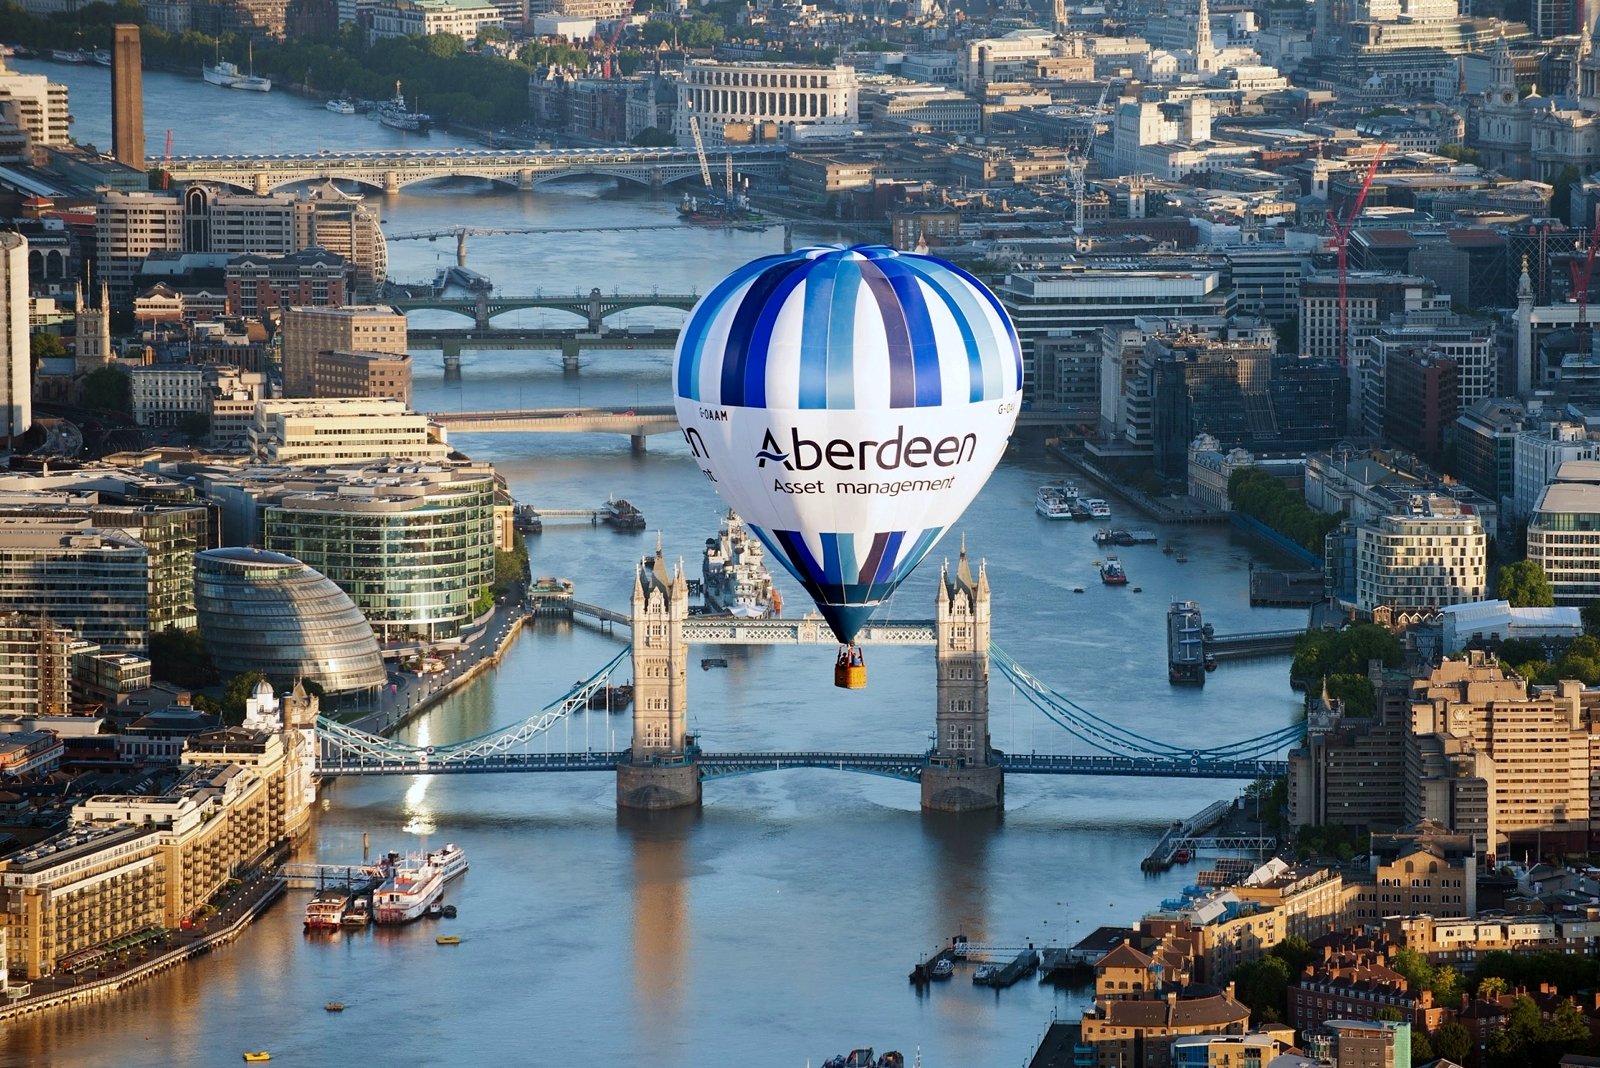 How to fly on a hot air balloon in London